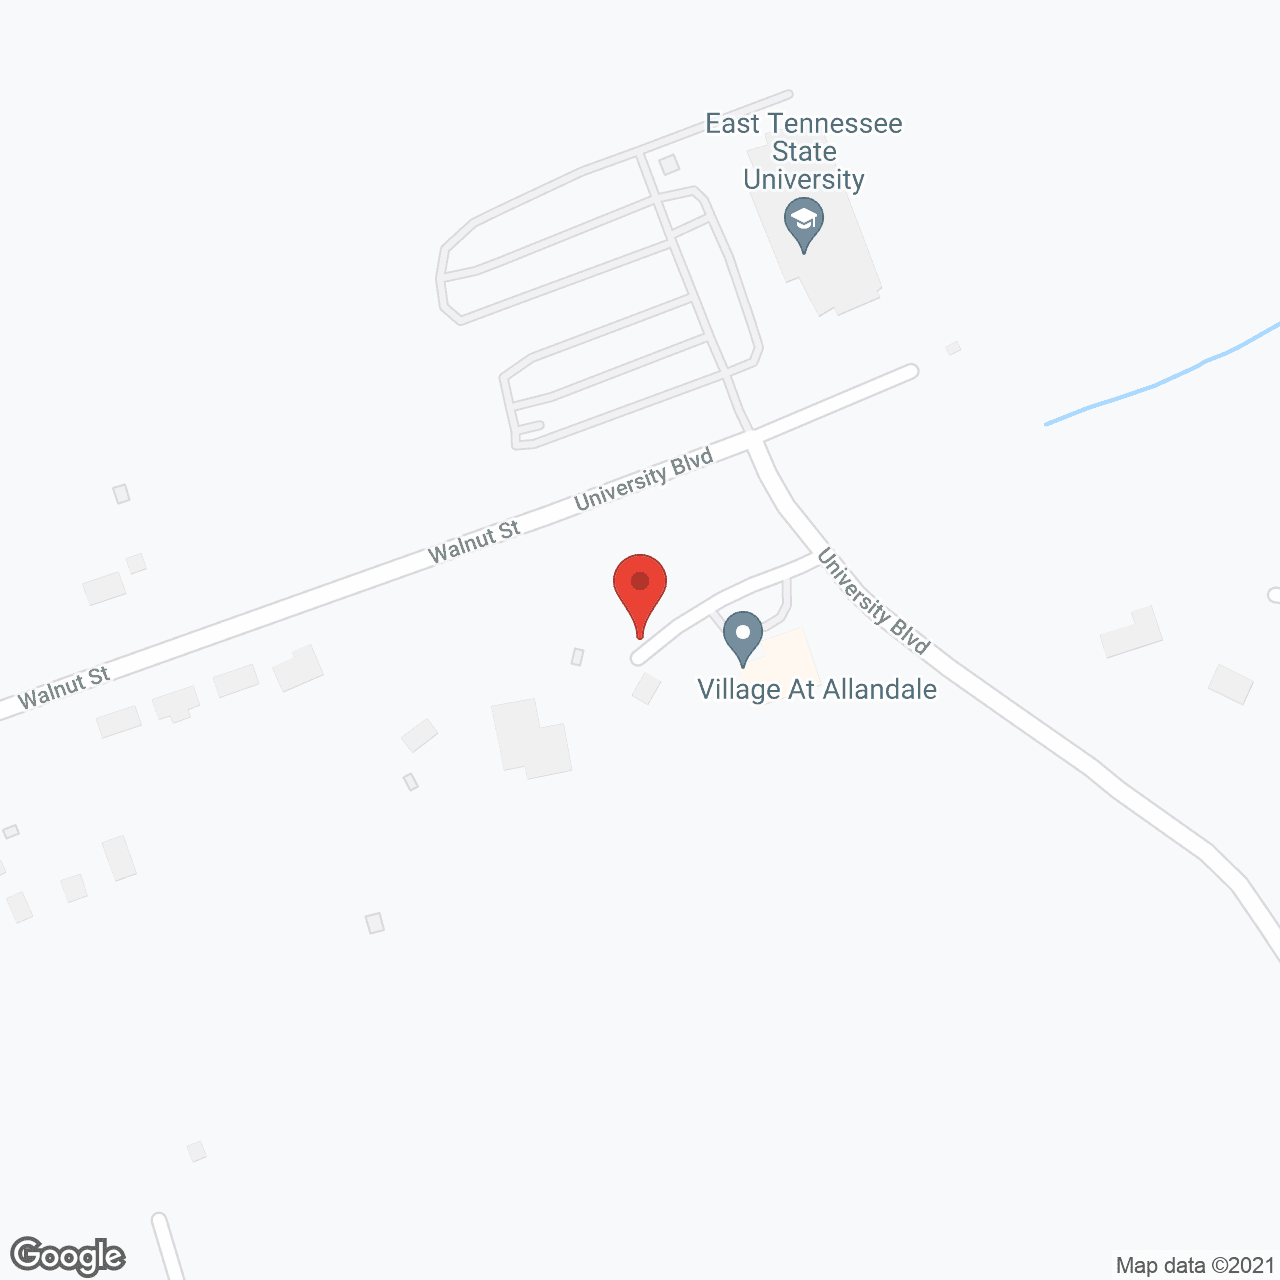 The Village At Allandale in google map